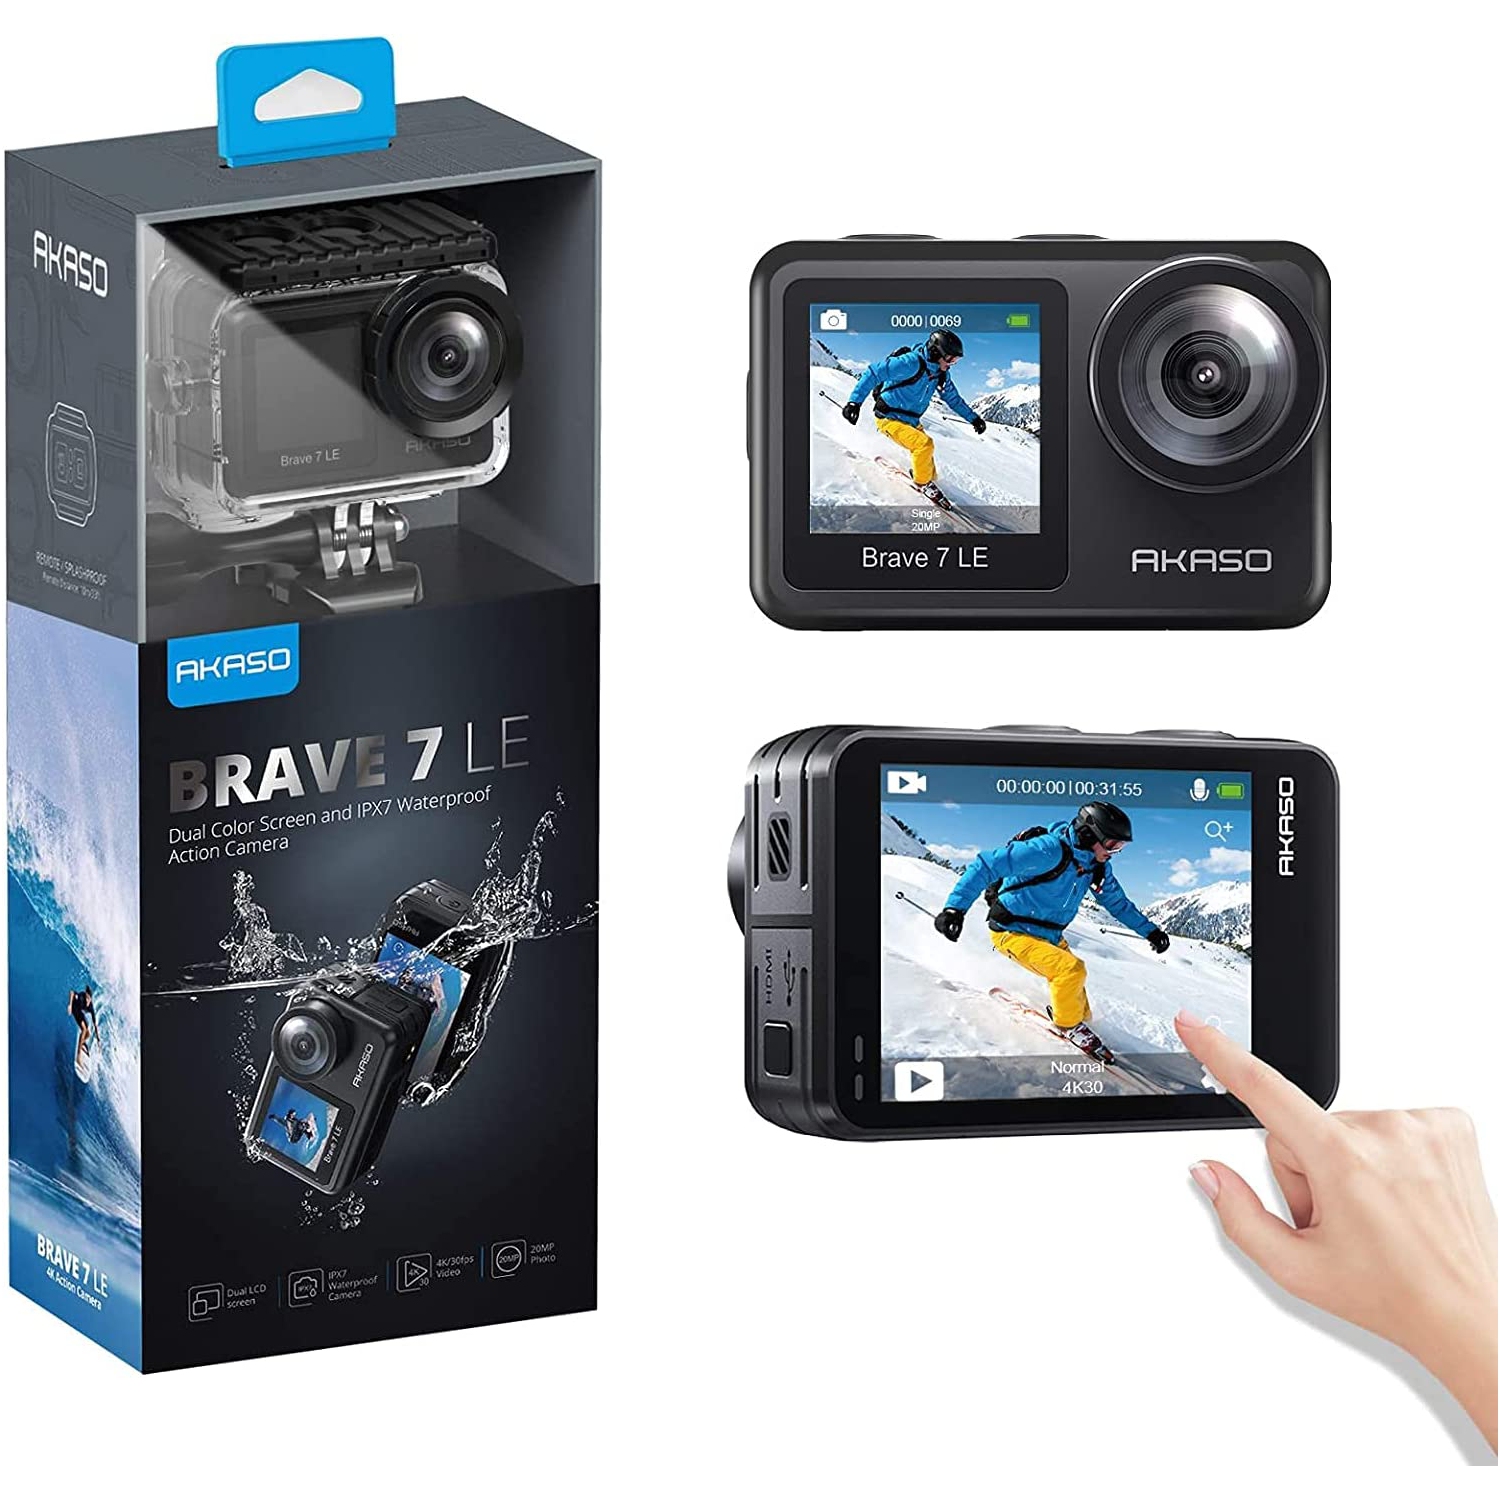 Open Box - AKASO Brave 7 LE Dual Display 4K 30FPS 20MP WiFi Action Camera with Touch Screen